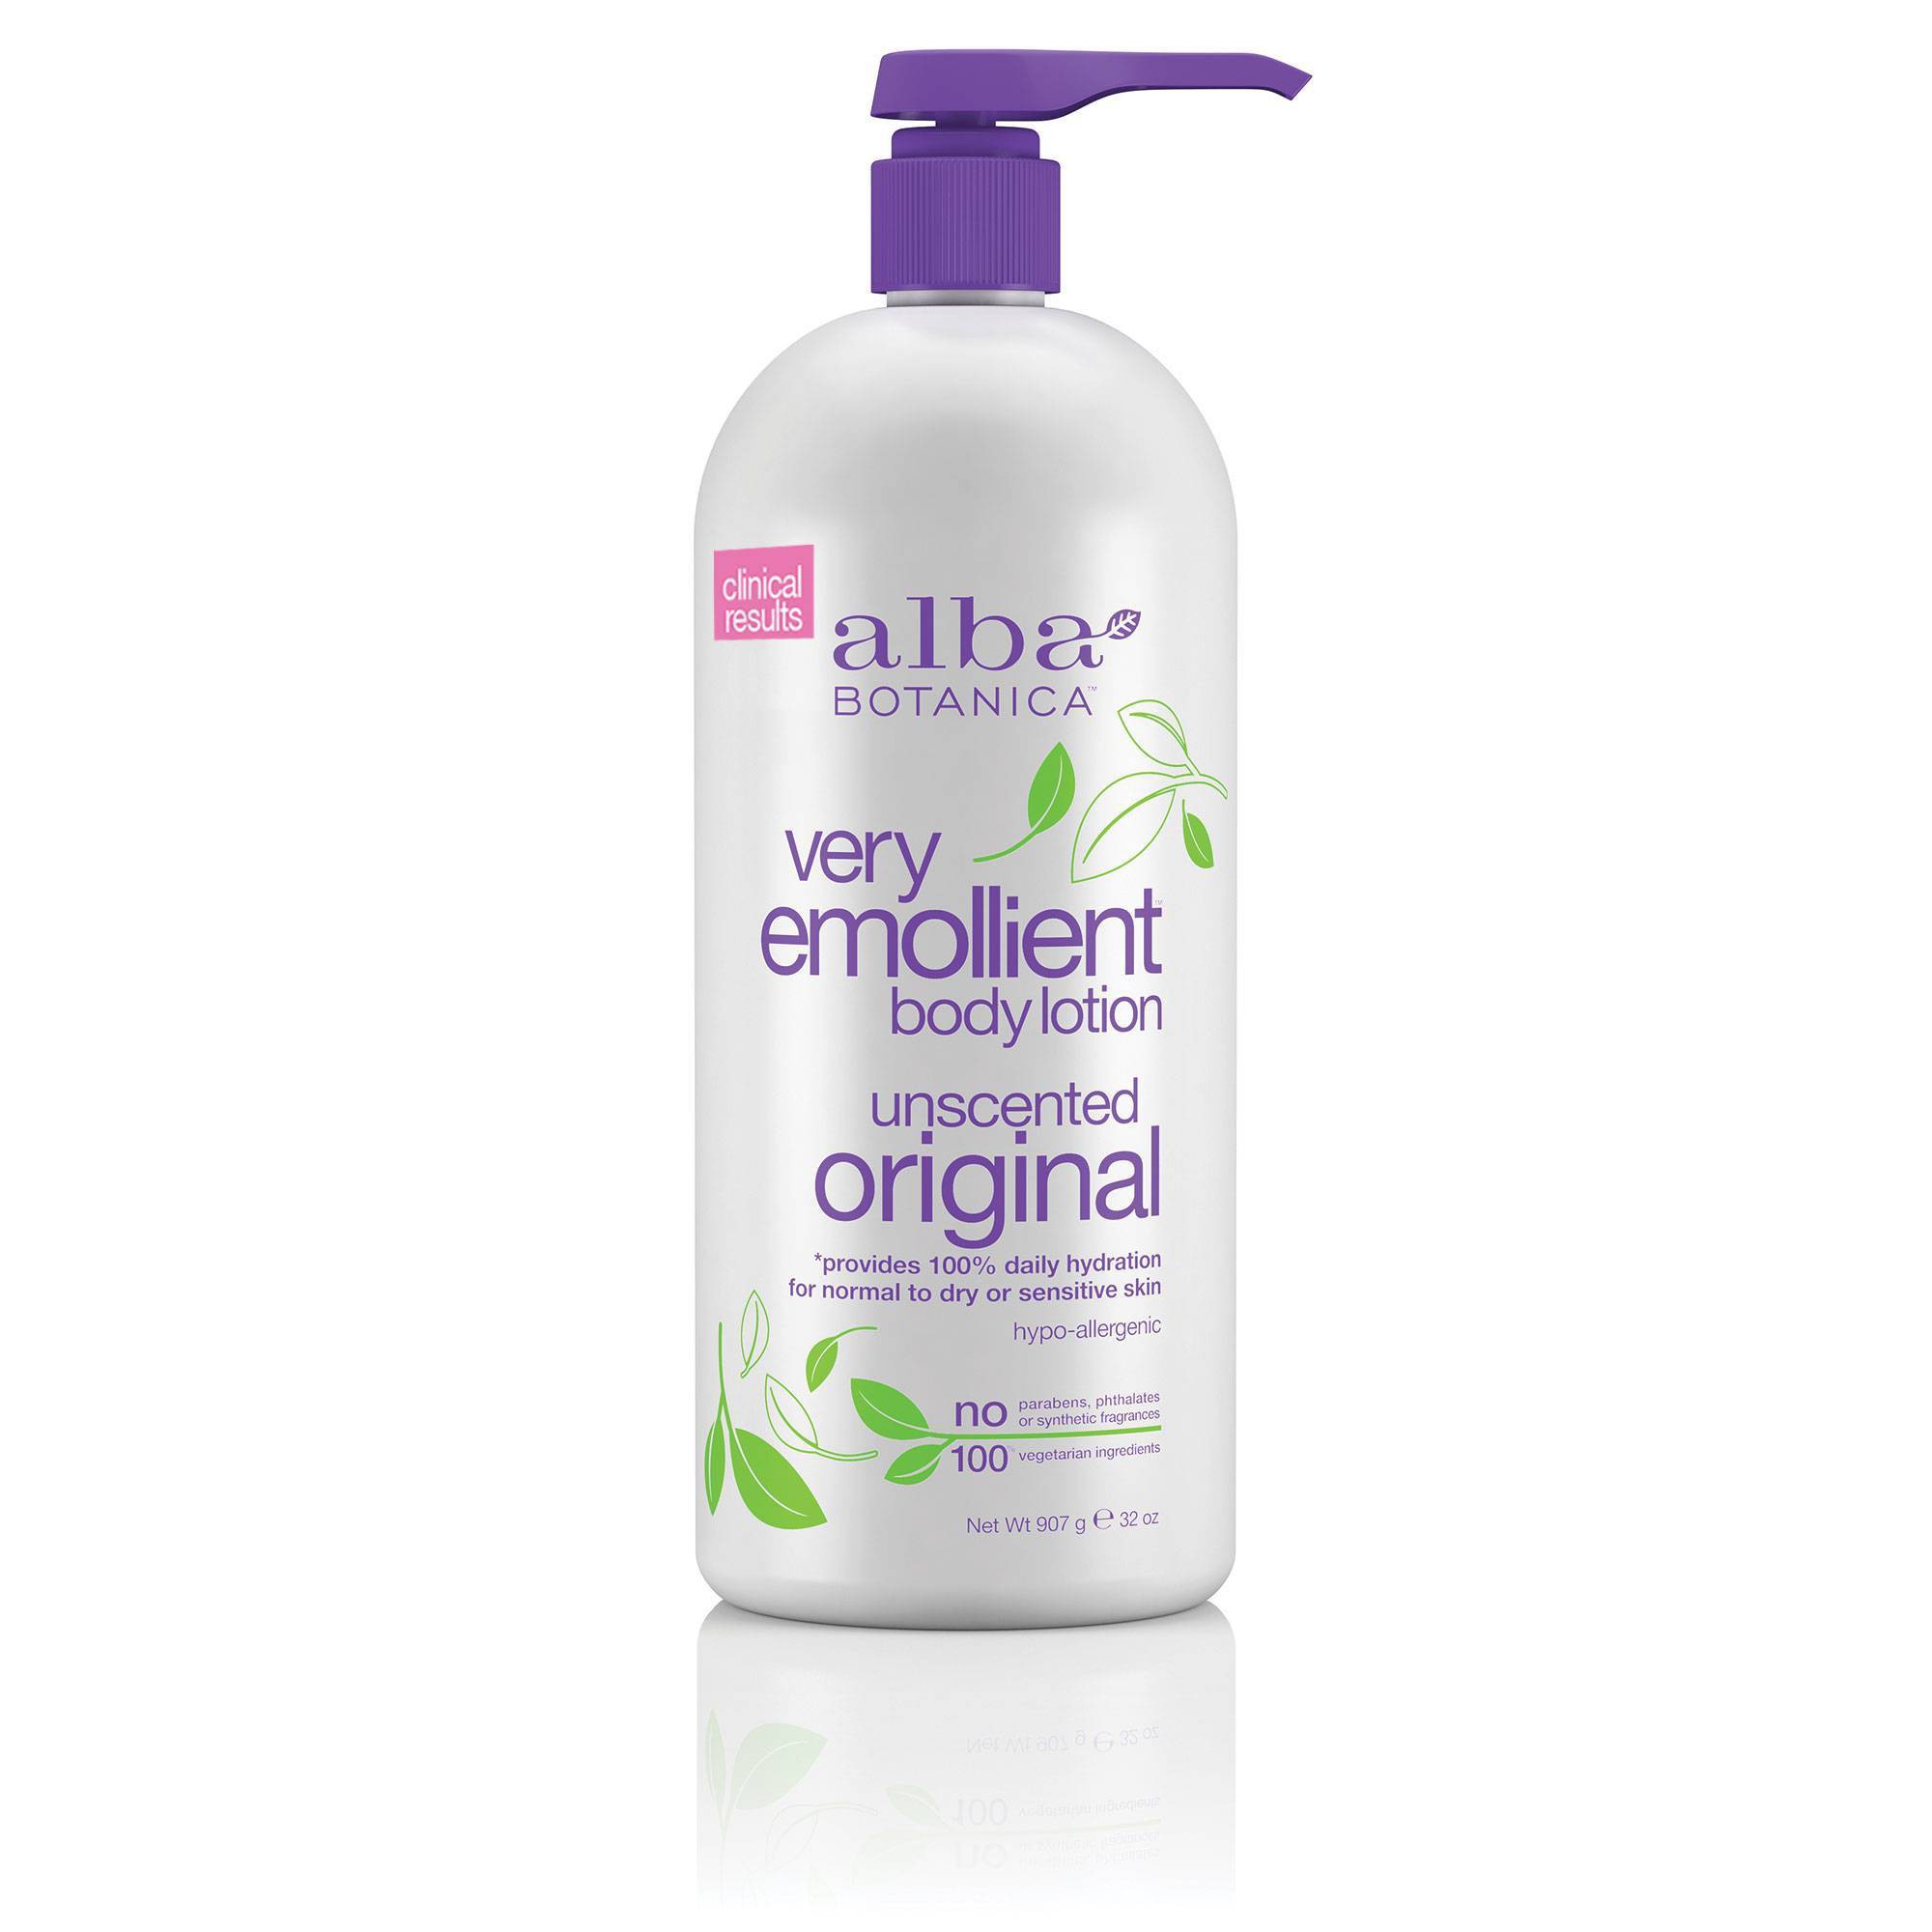 Unscented Alba Very Emollient Body Lotion - Unscented Original- 32oz